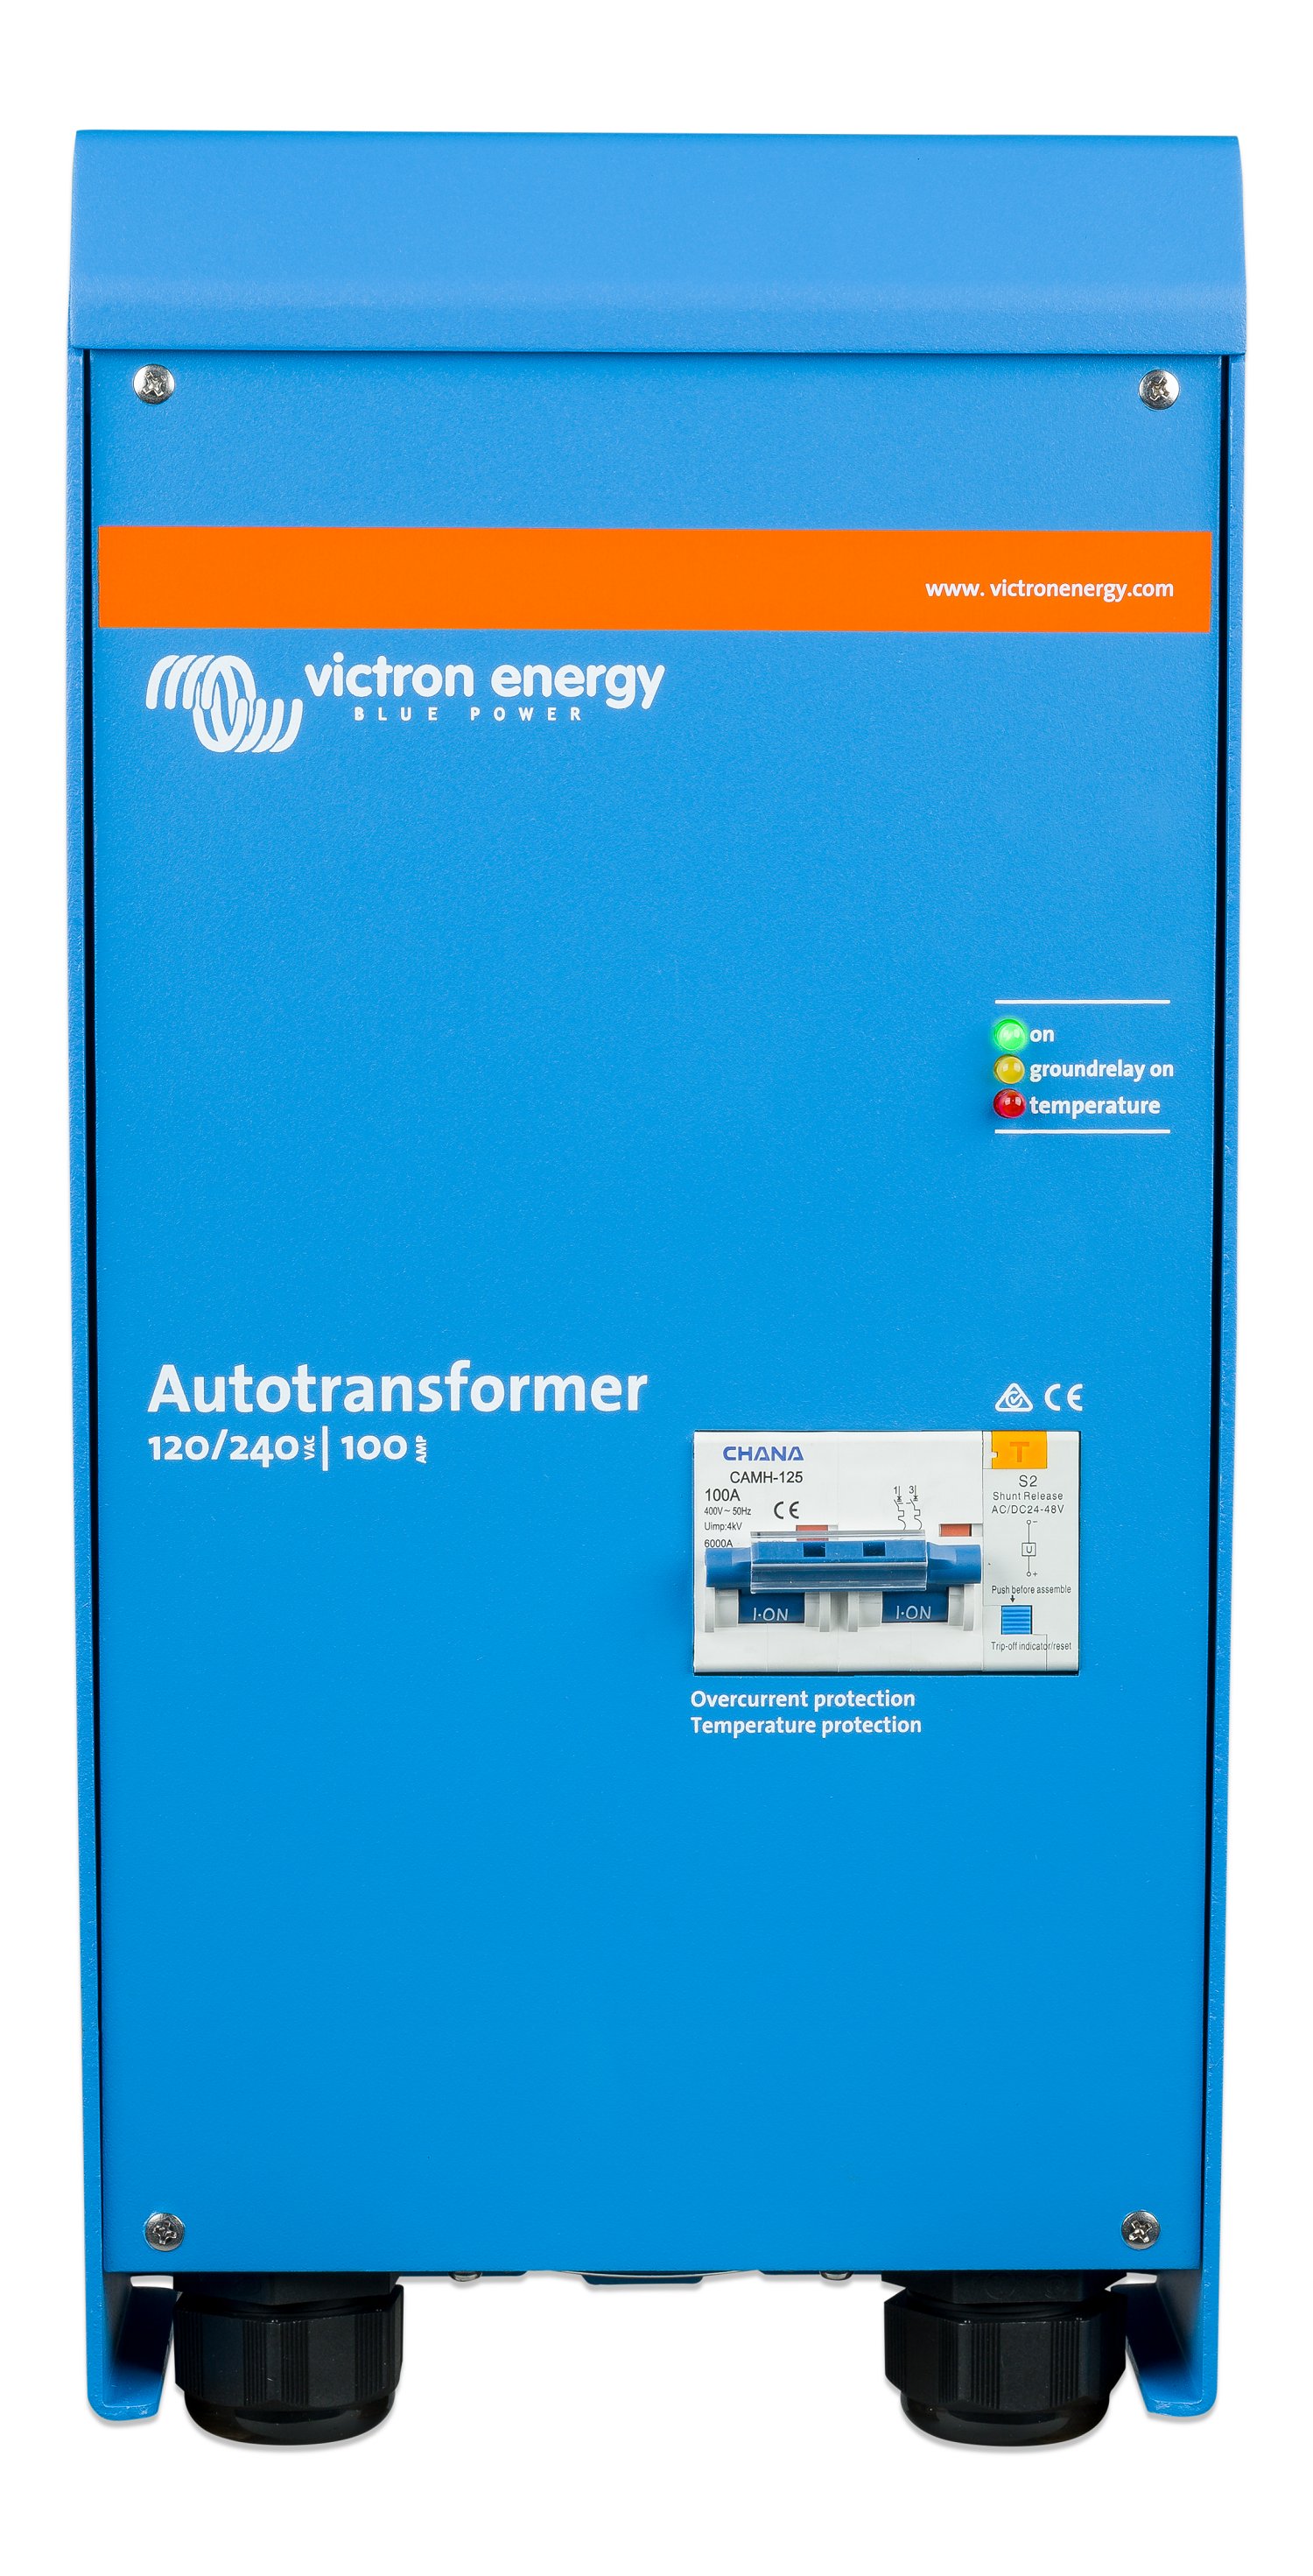 Victron Energy ITR000100101 Autotransformer 120/240V-100A Questions & Answers